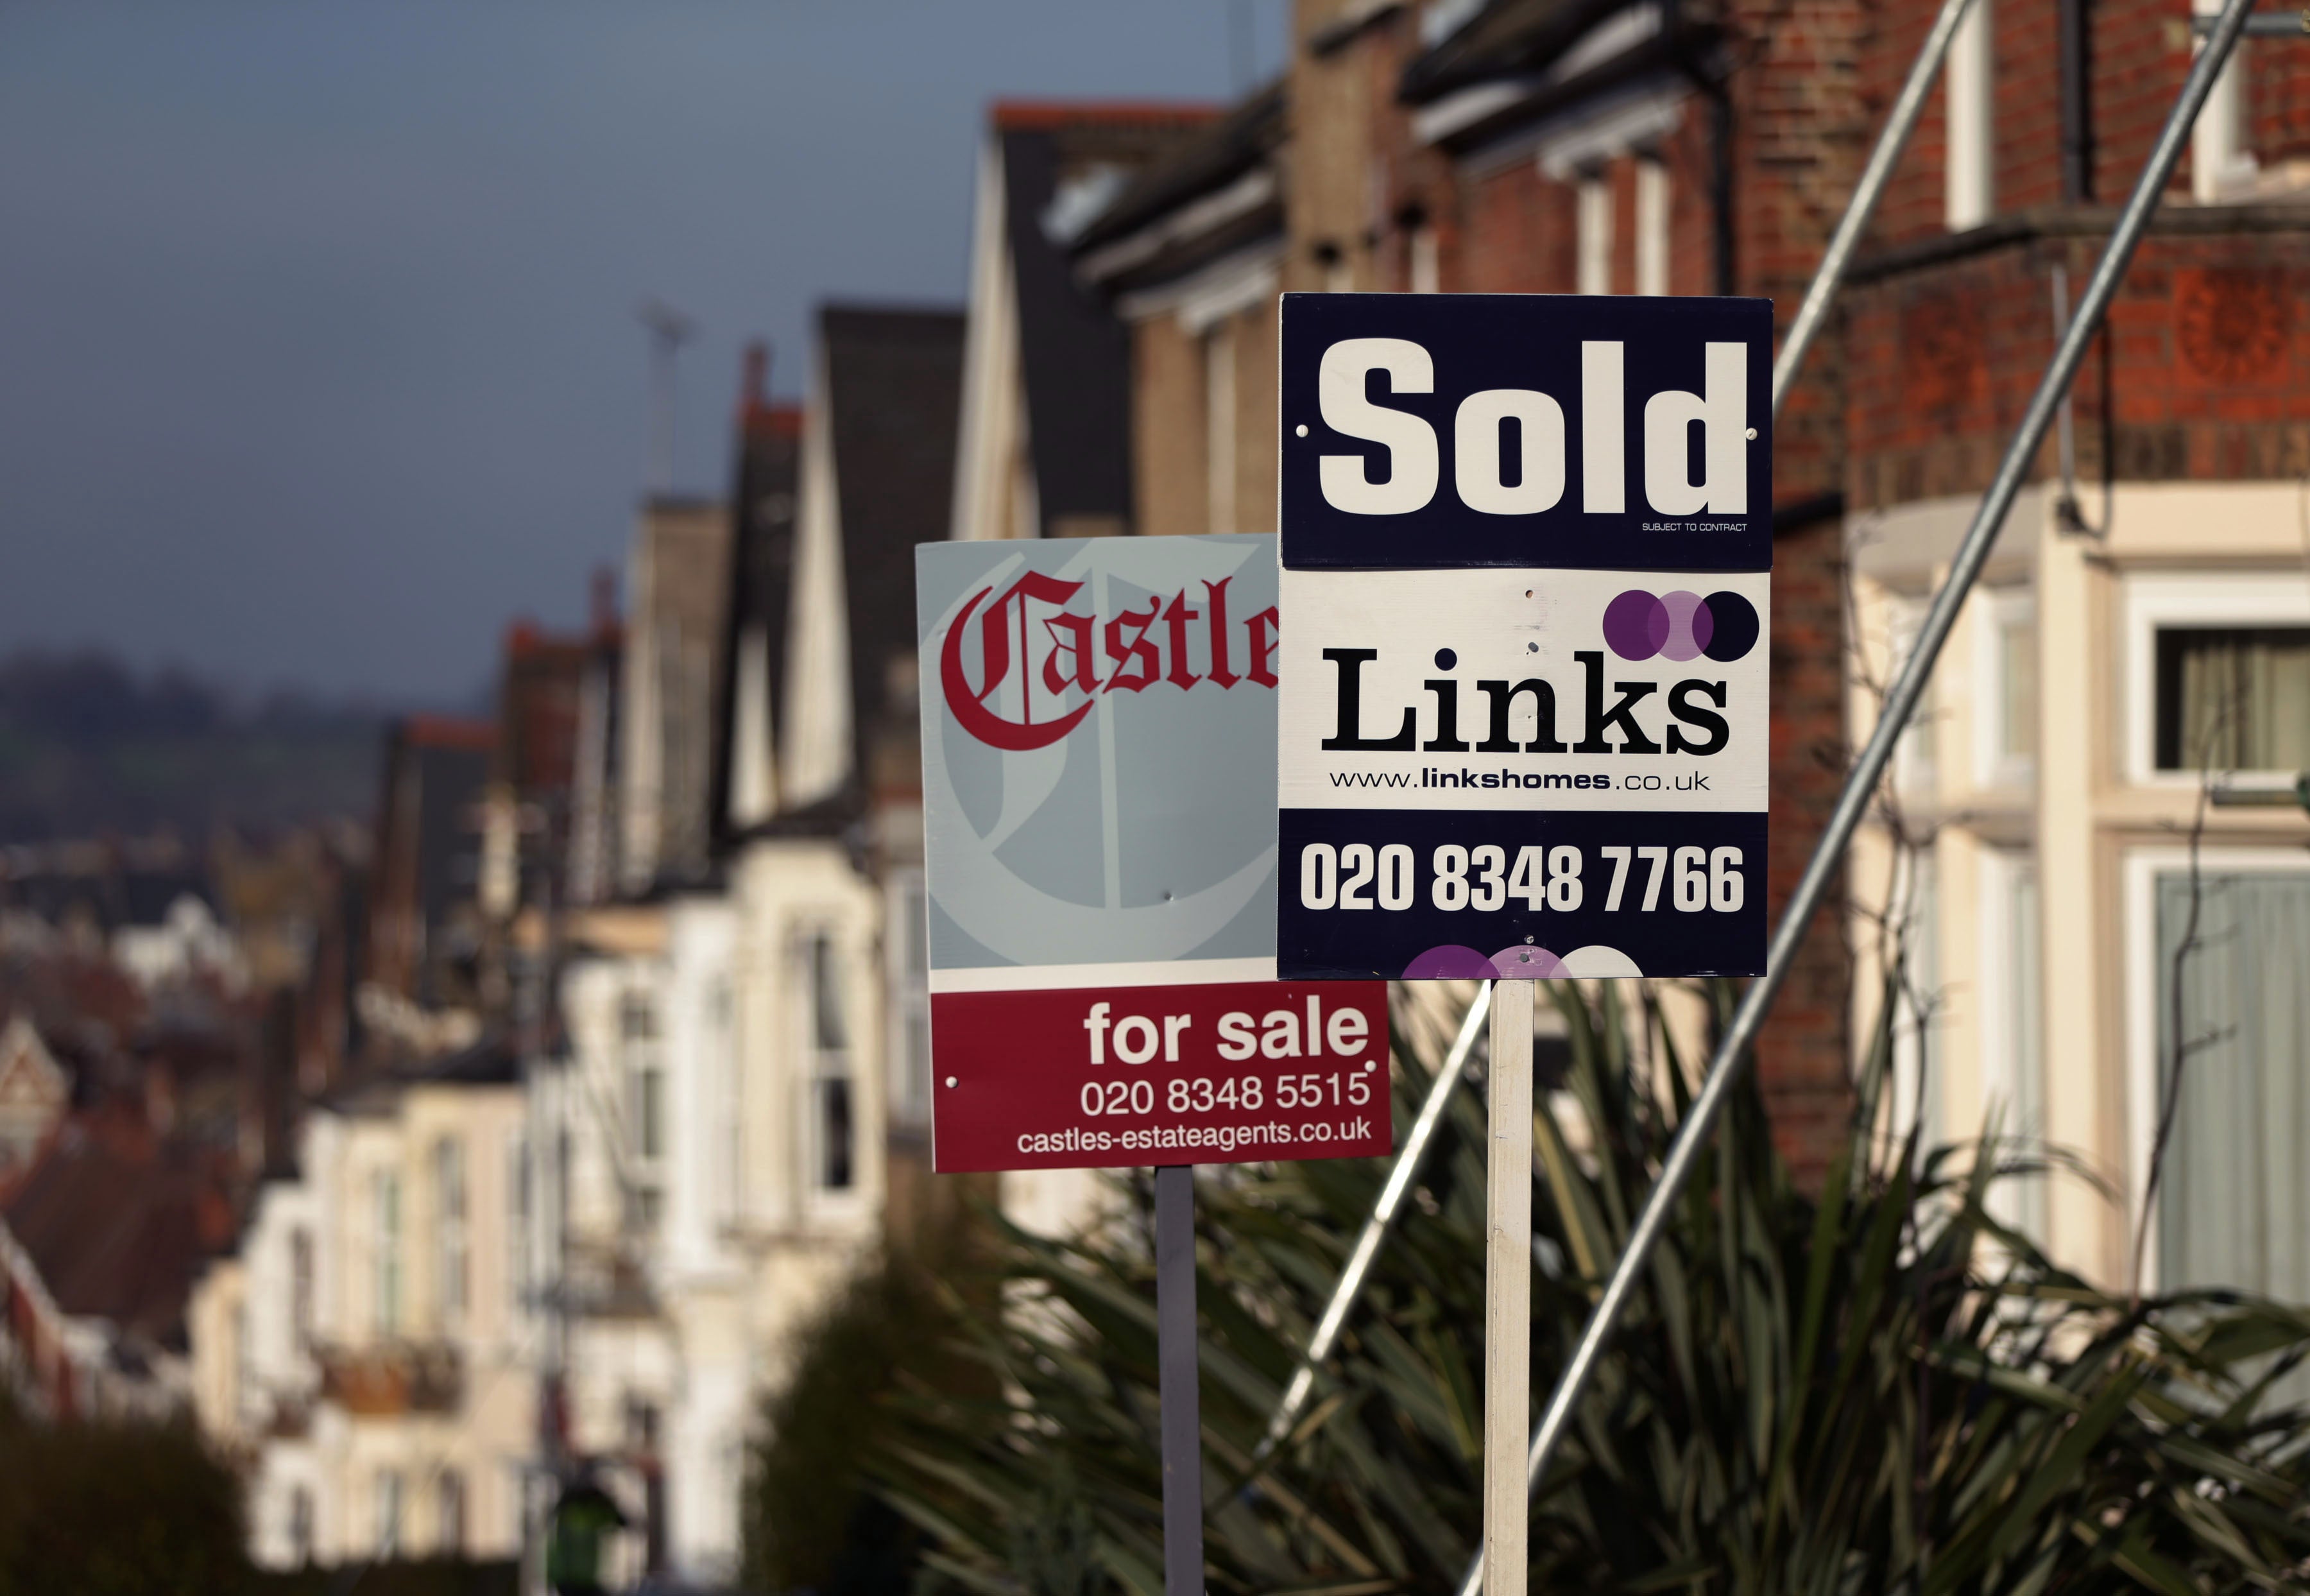 Prices had been boosted by buyers who have built up savings during lockdown